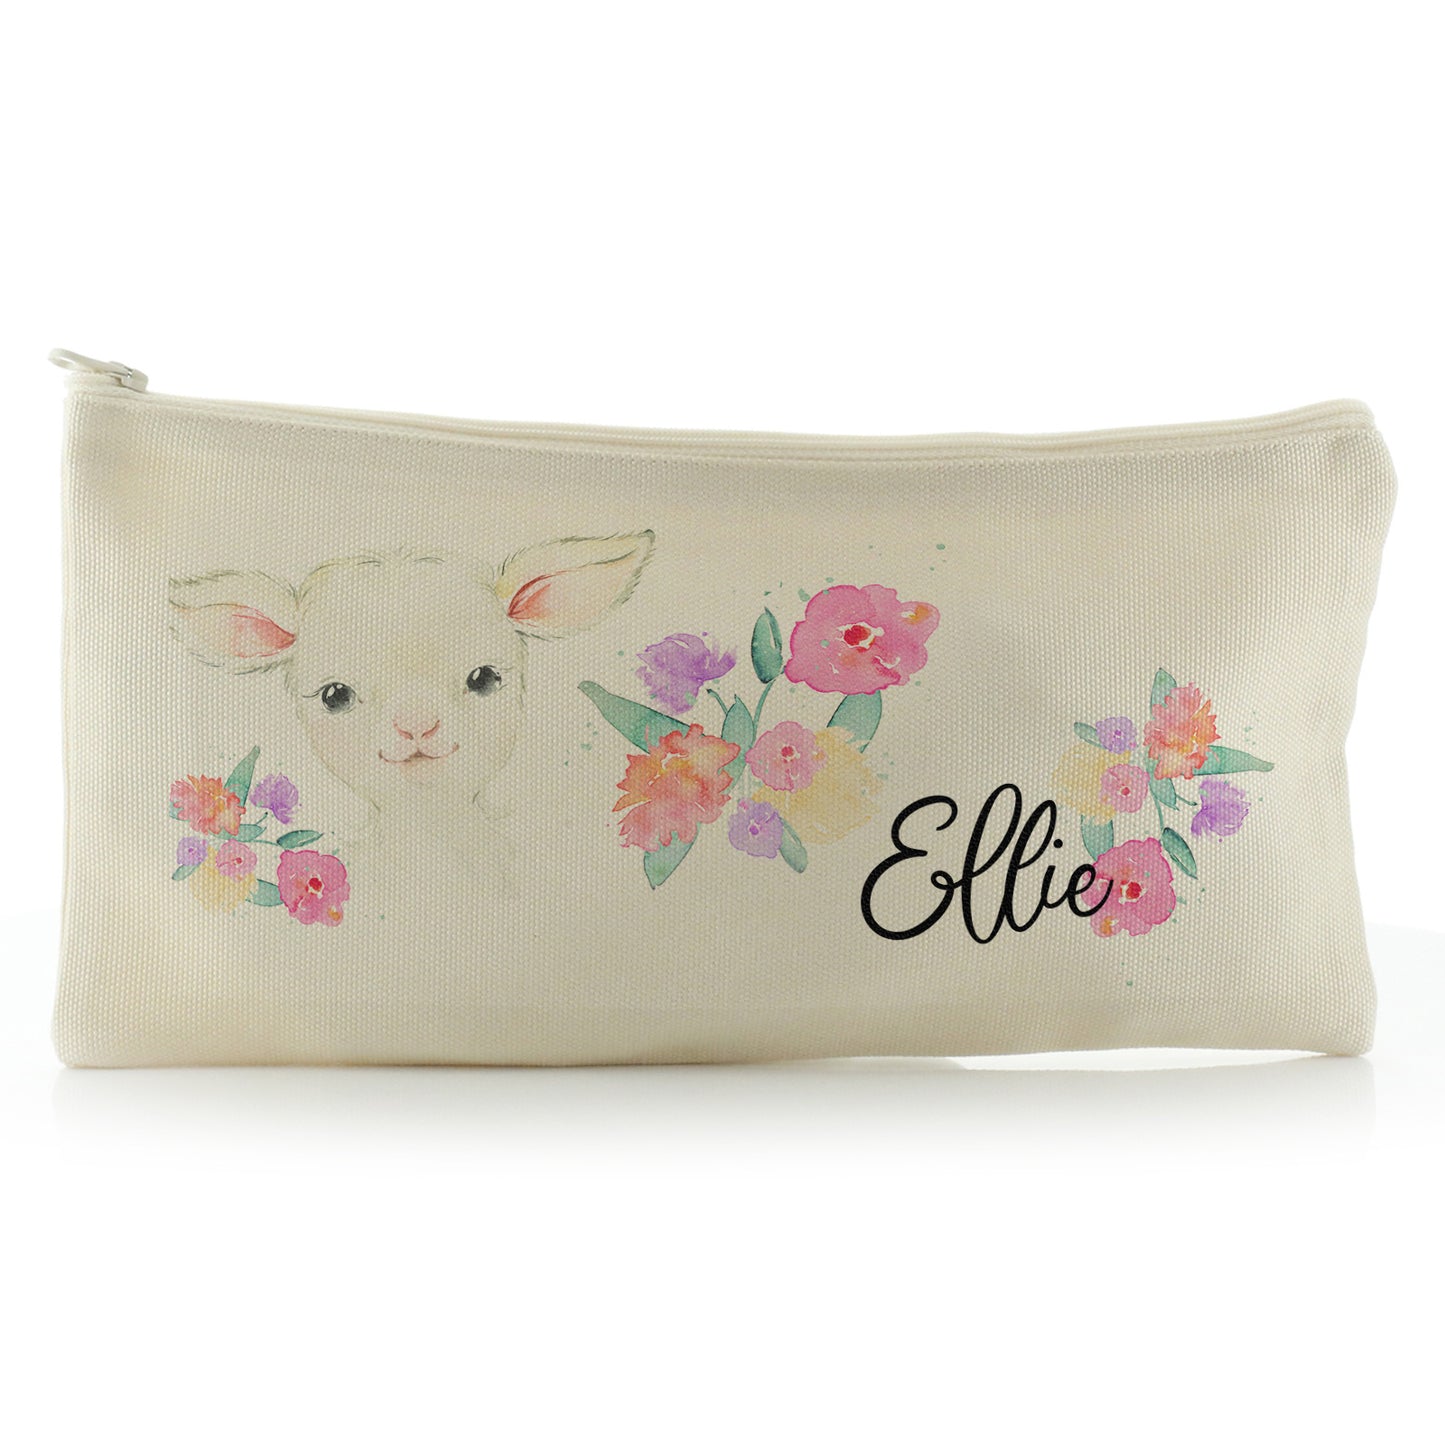 Personalised Canvas Zip Bag with White Lamb Flowers and Cute Text